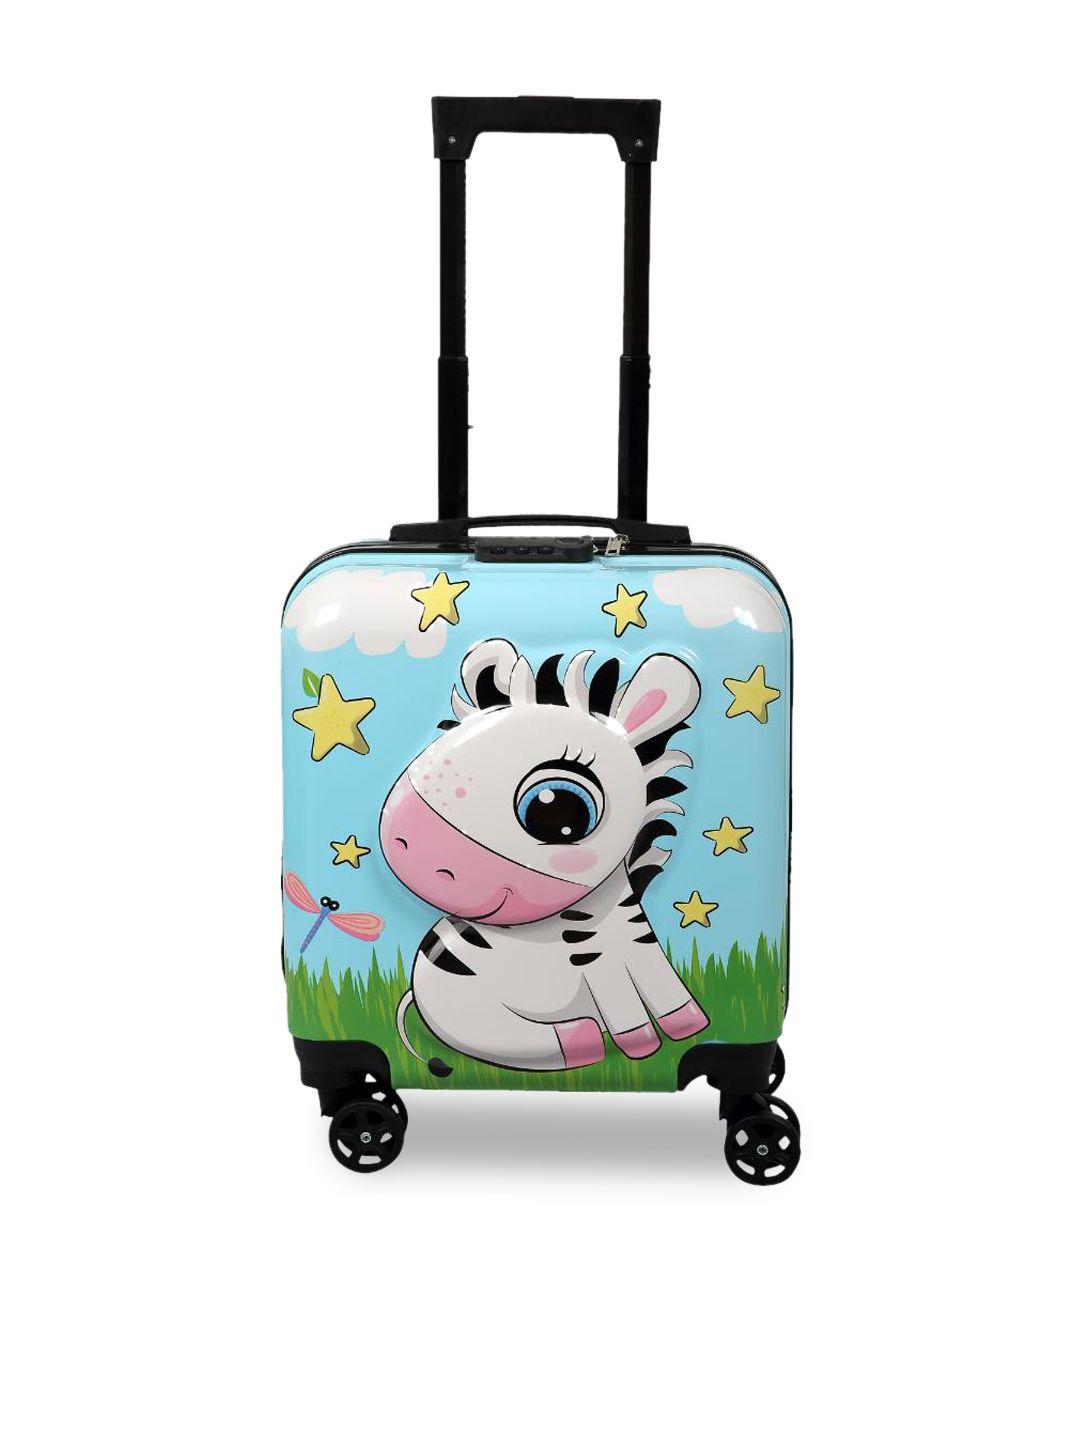 polo class kids graphic printed trolley bag